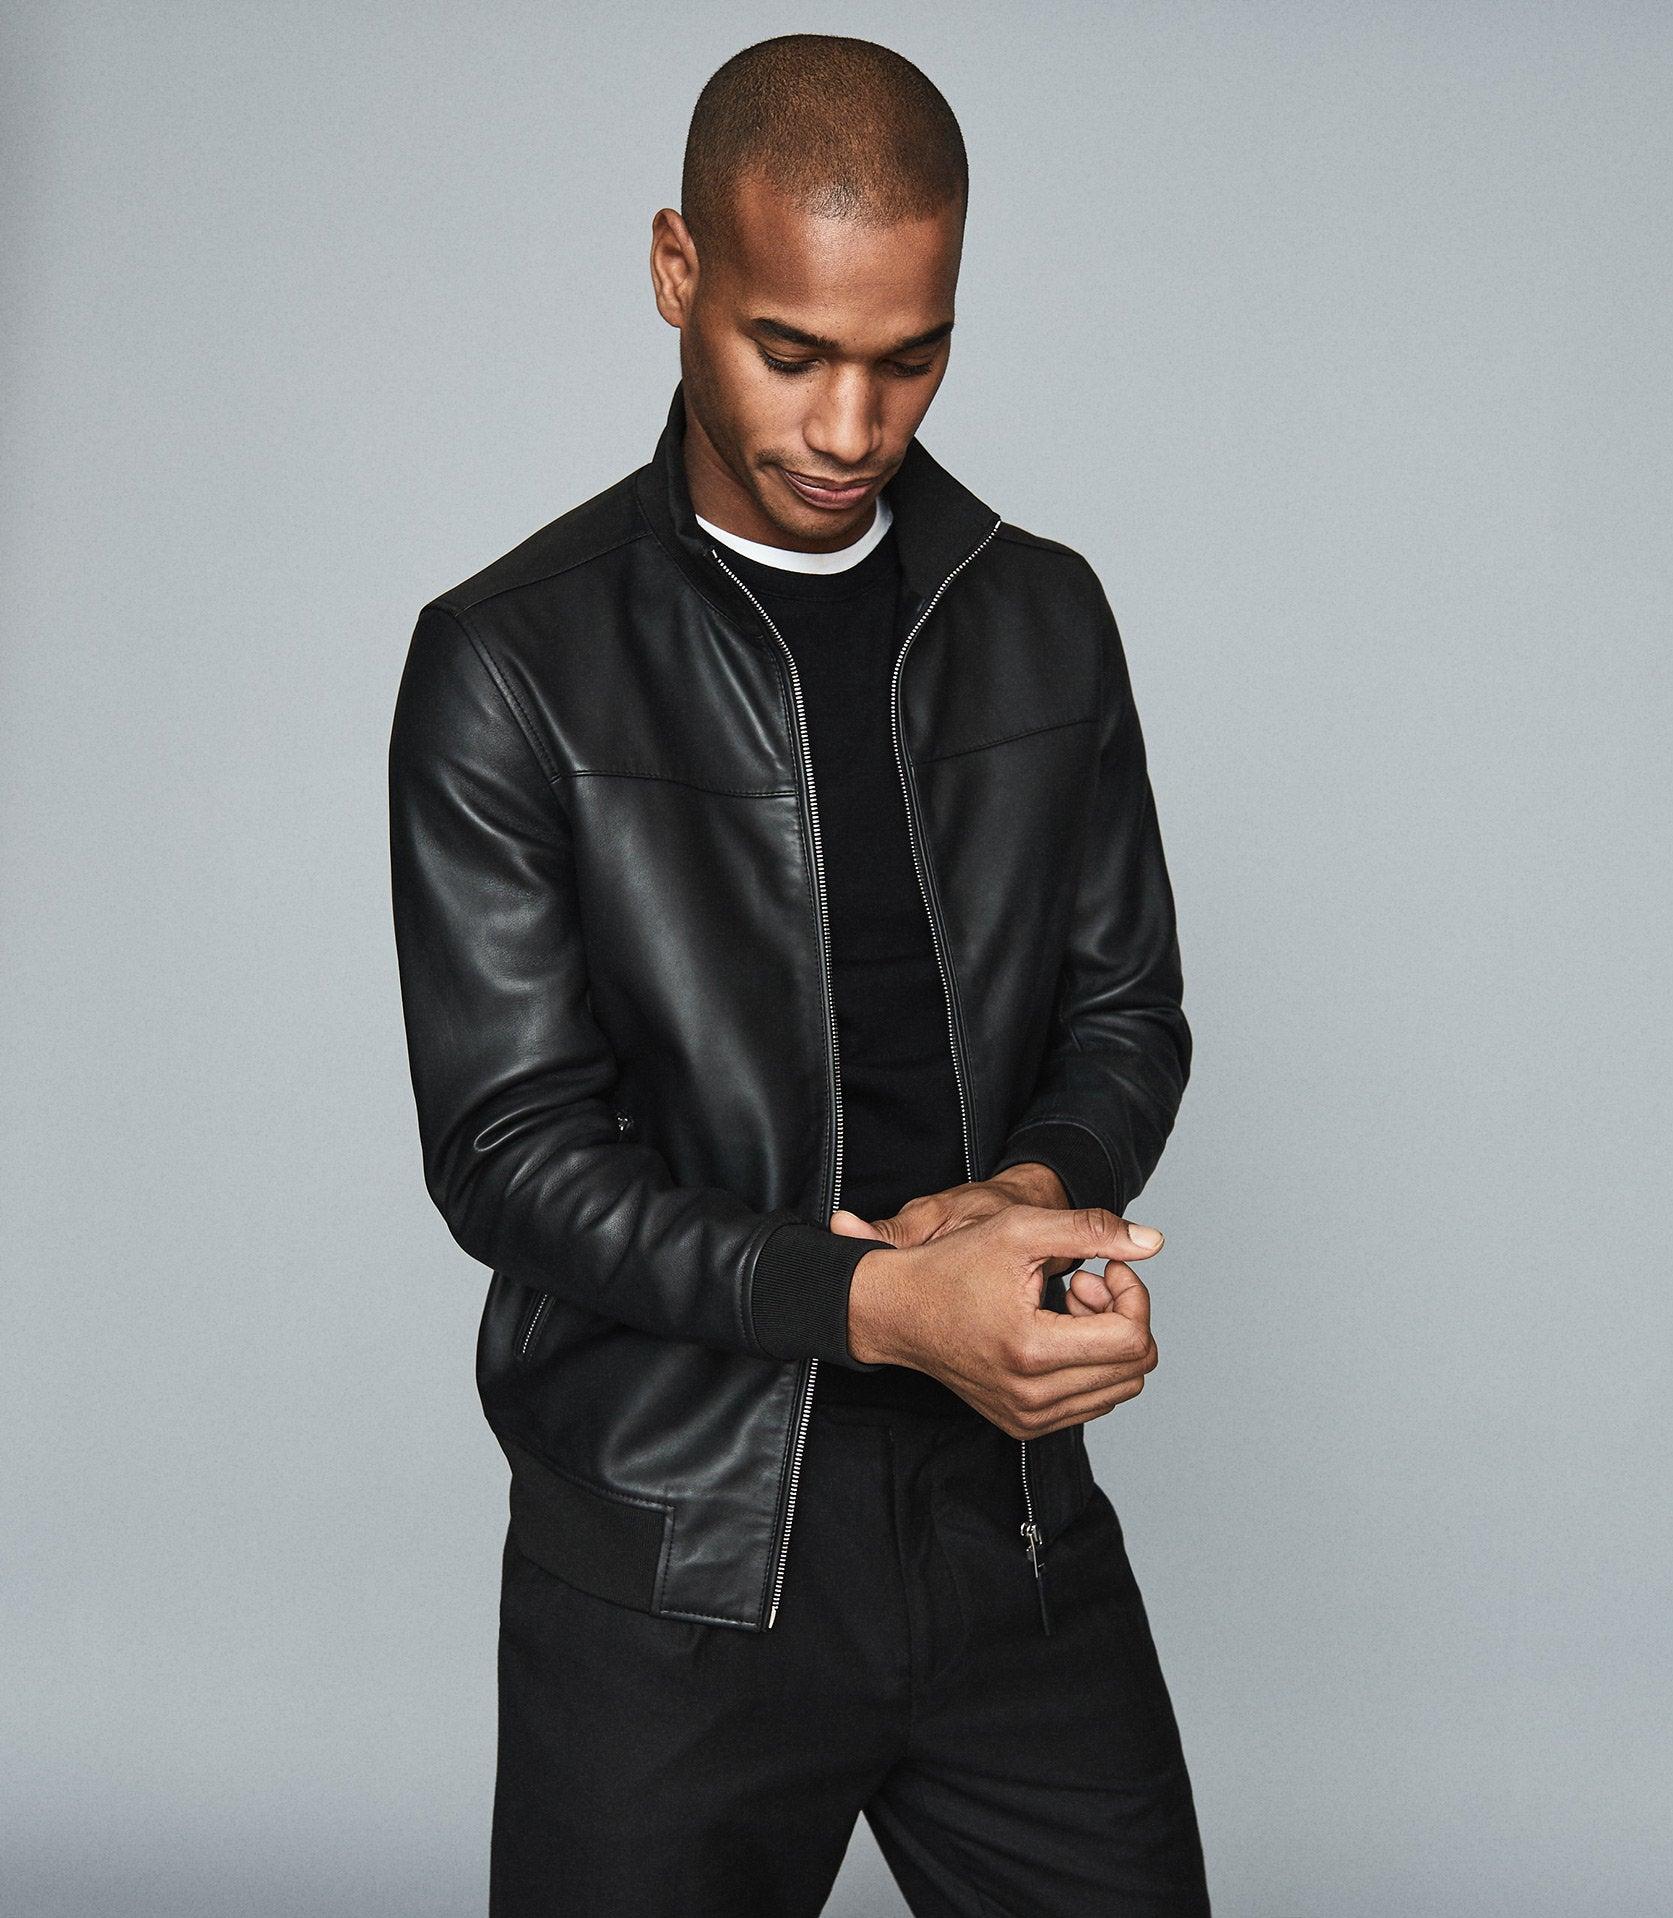 Reiss Mineral - Leather Bomber Jacket in Black for Men - Lyst